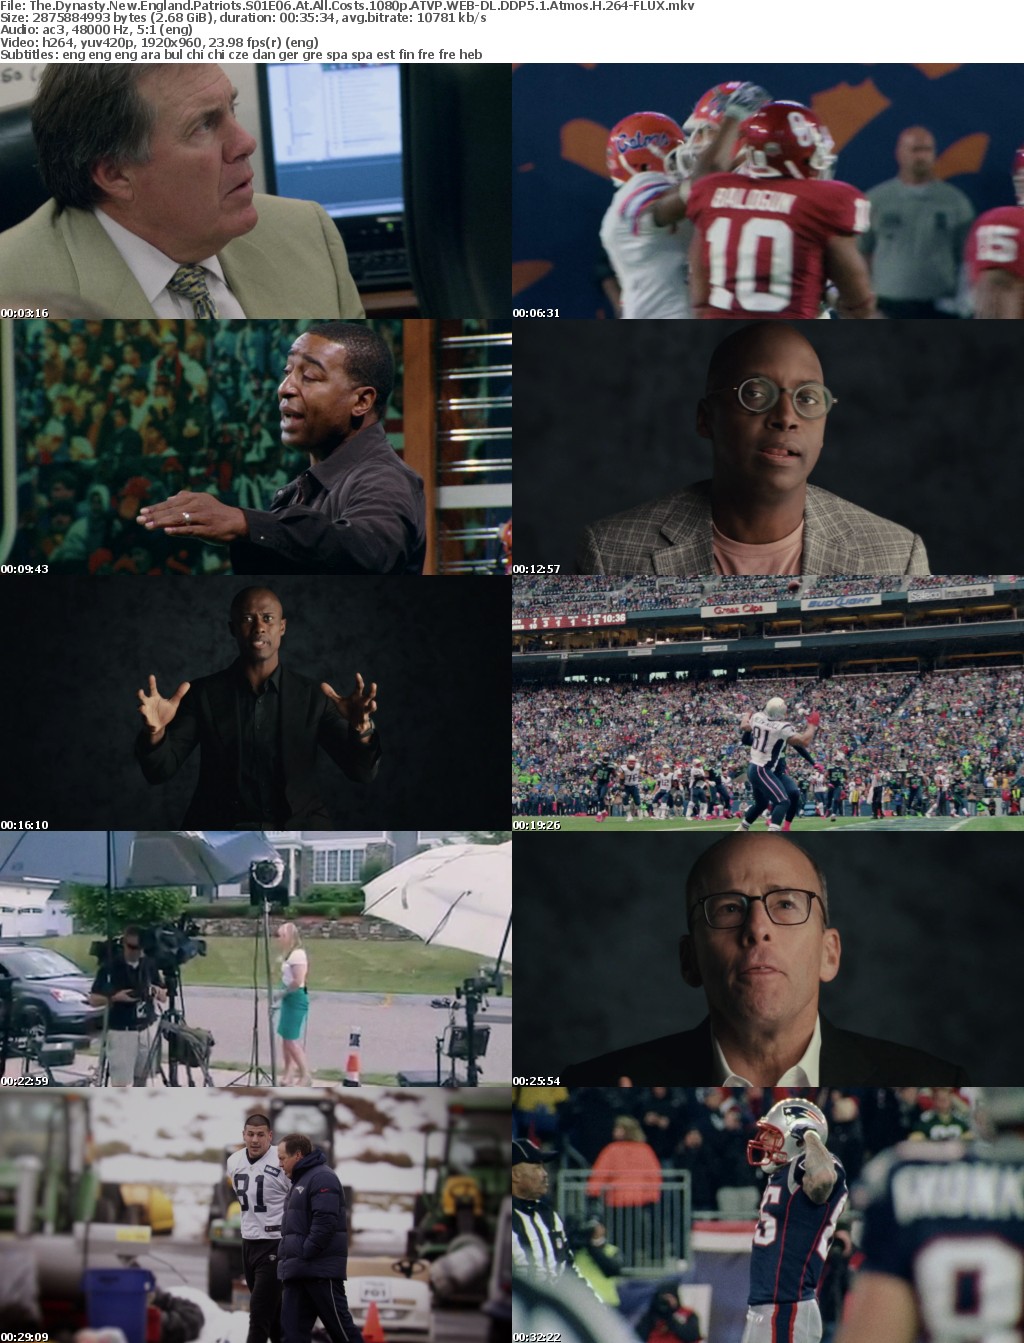 The Dynasty New England Patriots S01E06 At All Costs 1080p ATVP WEB-DL DDP5 1 Atmos H 264-FLUX